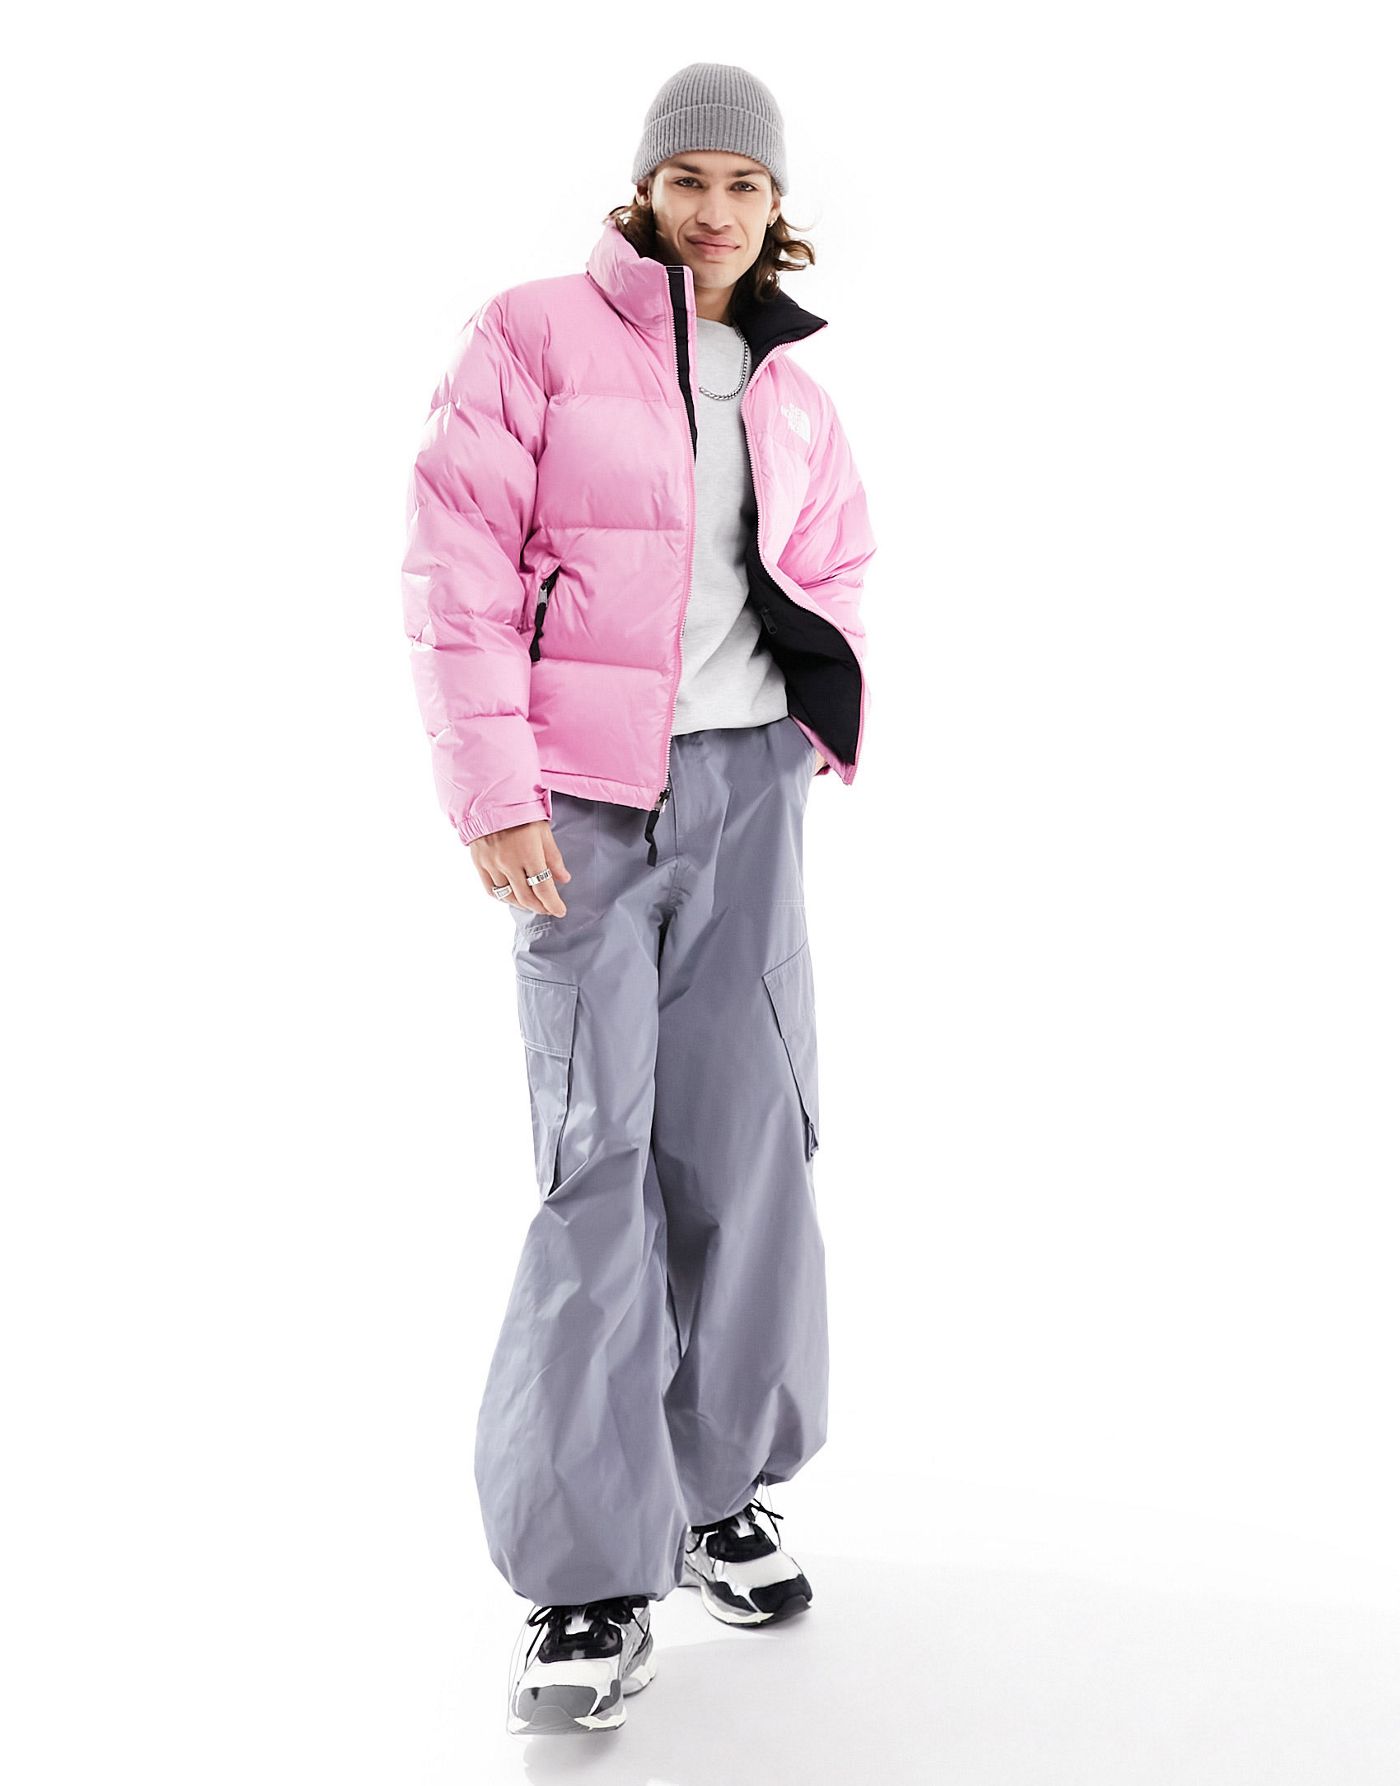 The North Face '96 Retro Nuptse down puffer jacket in pink